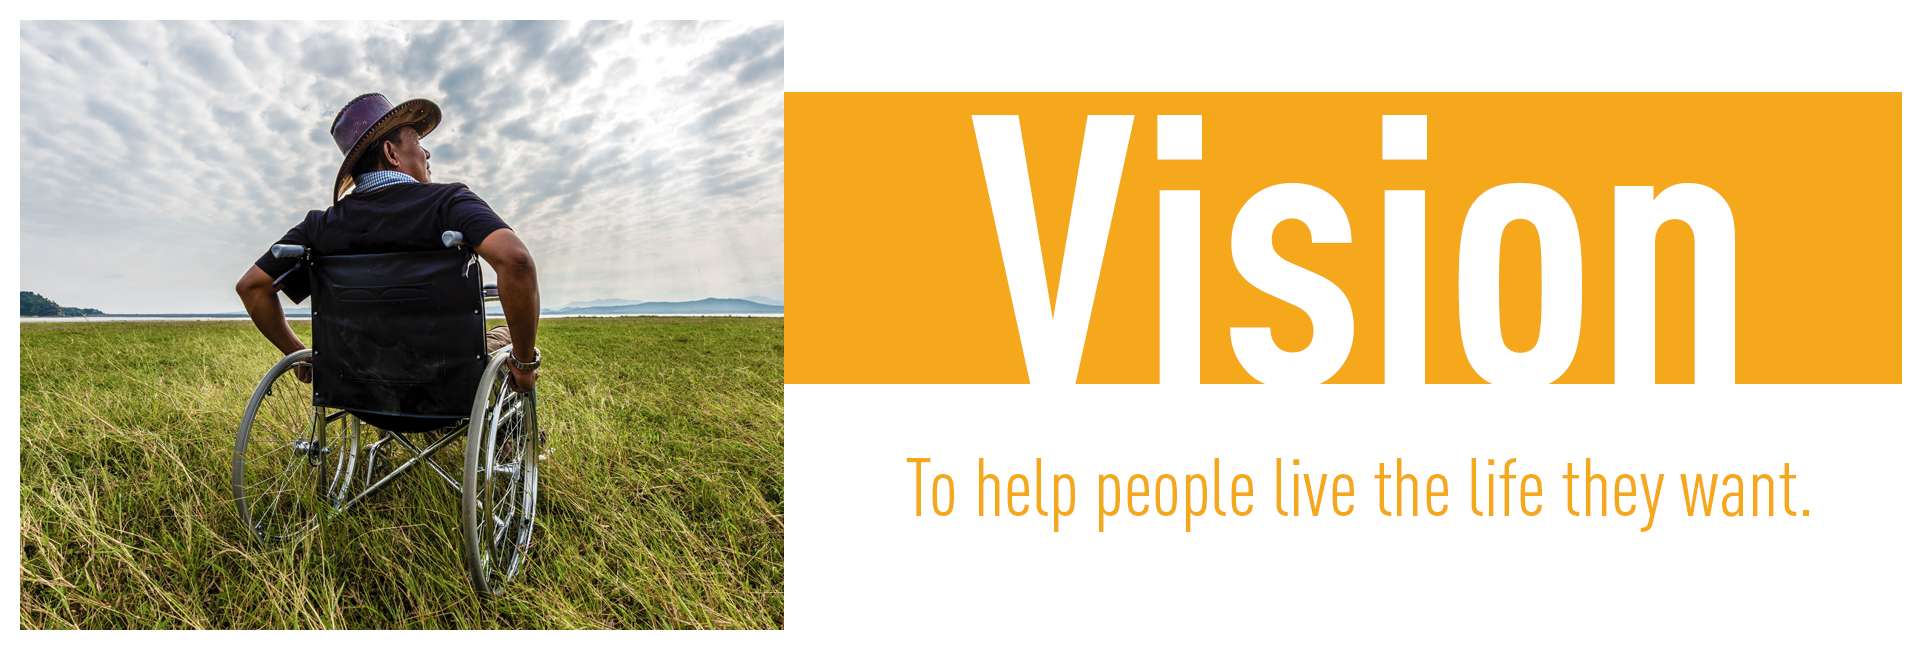 Vision: To help people live the life they want.